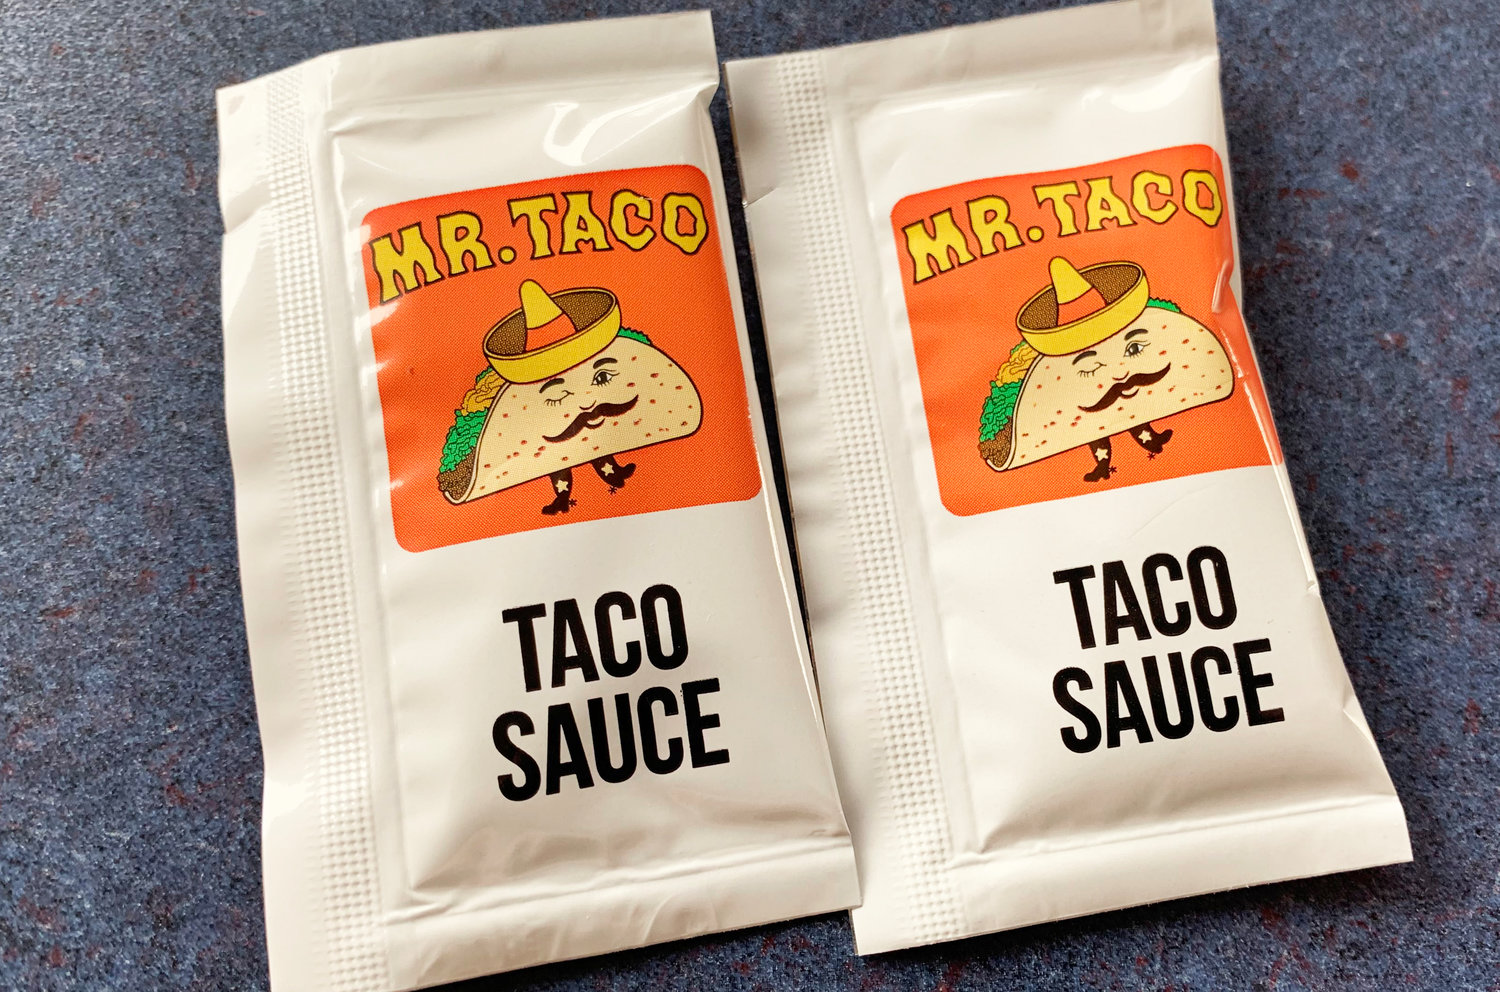 Two packets of Mr. Taco's taco sauce.